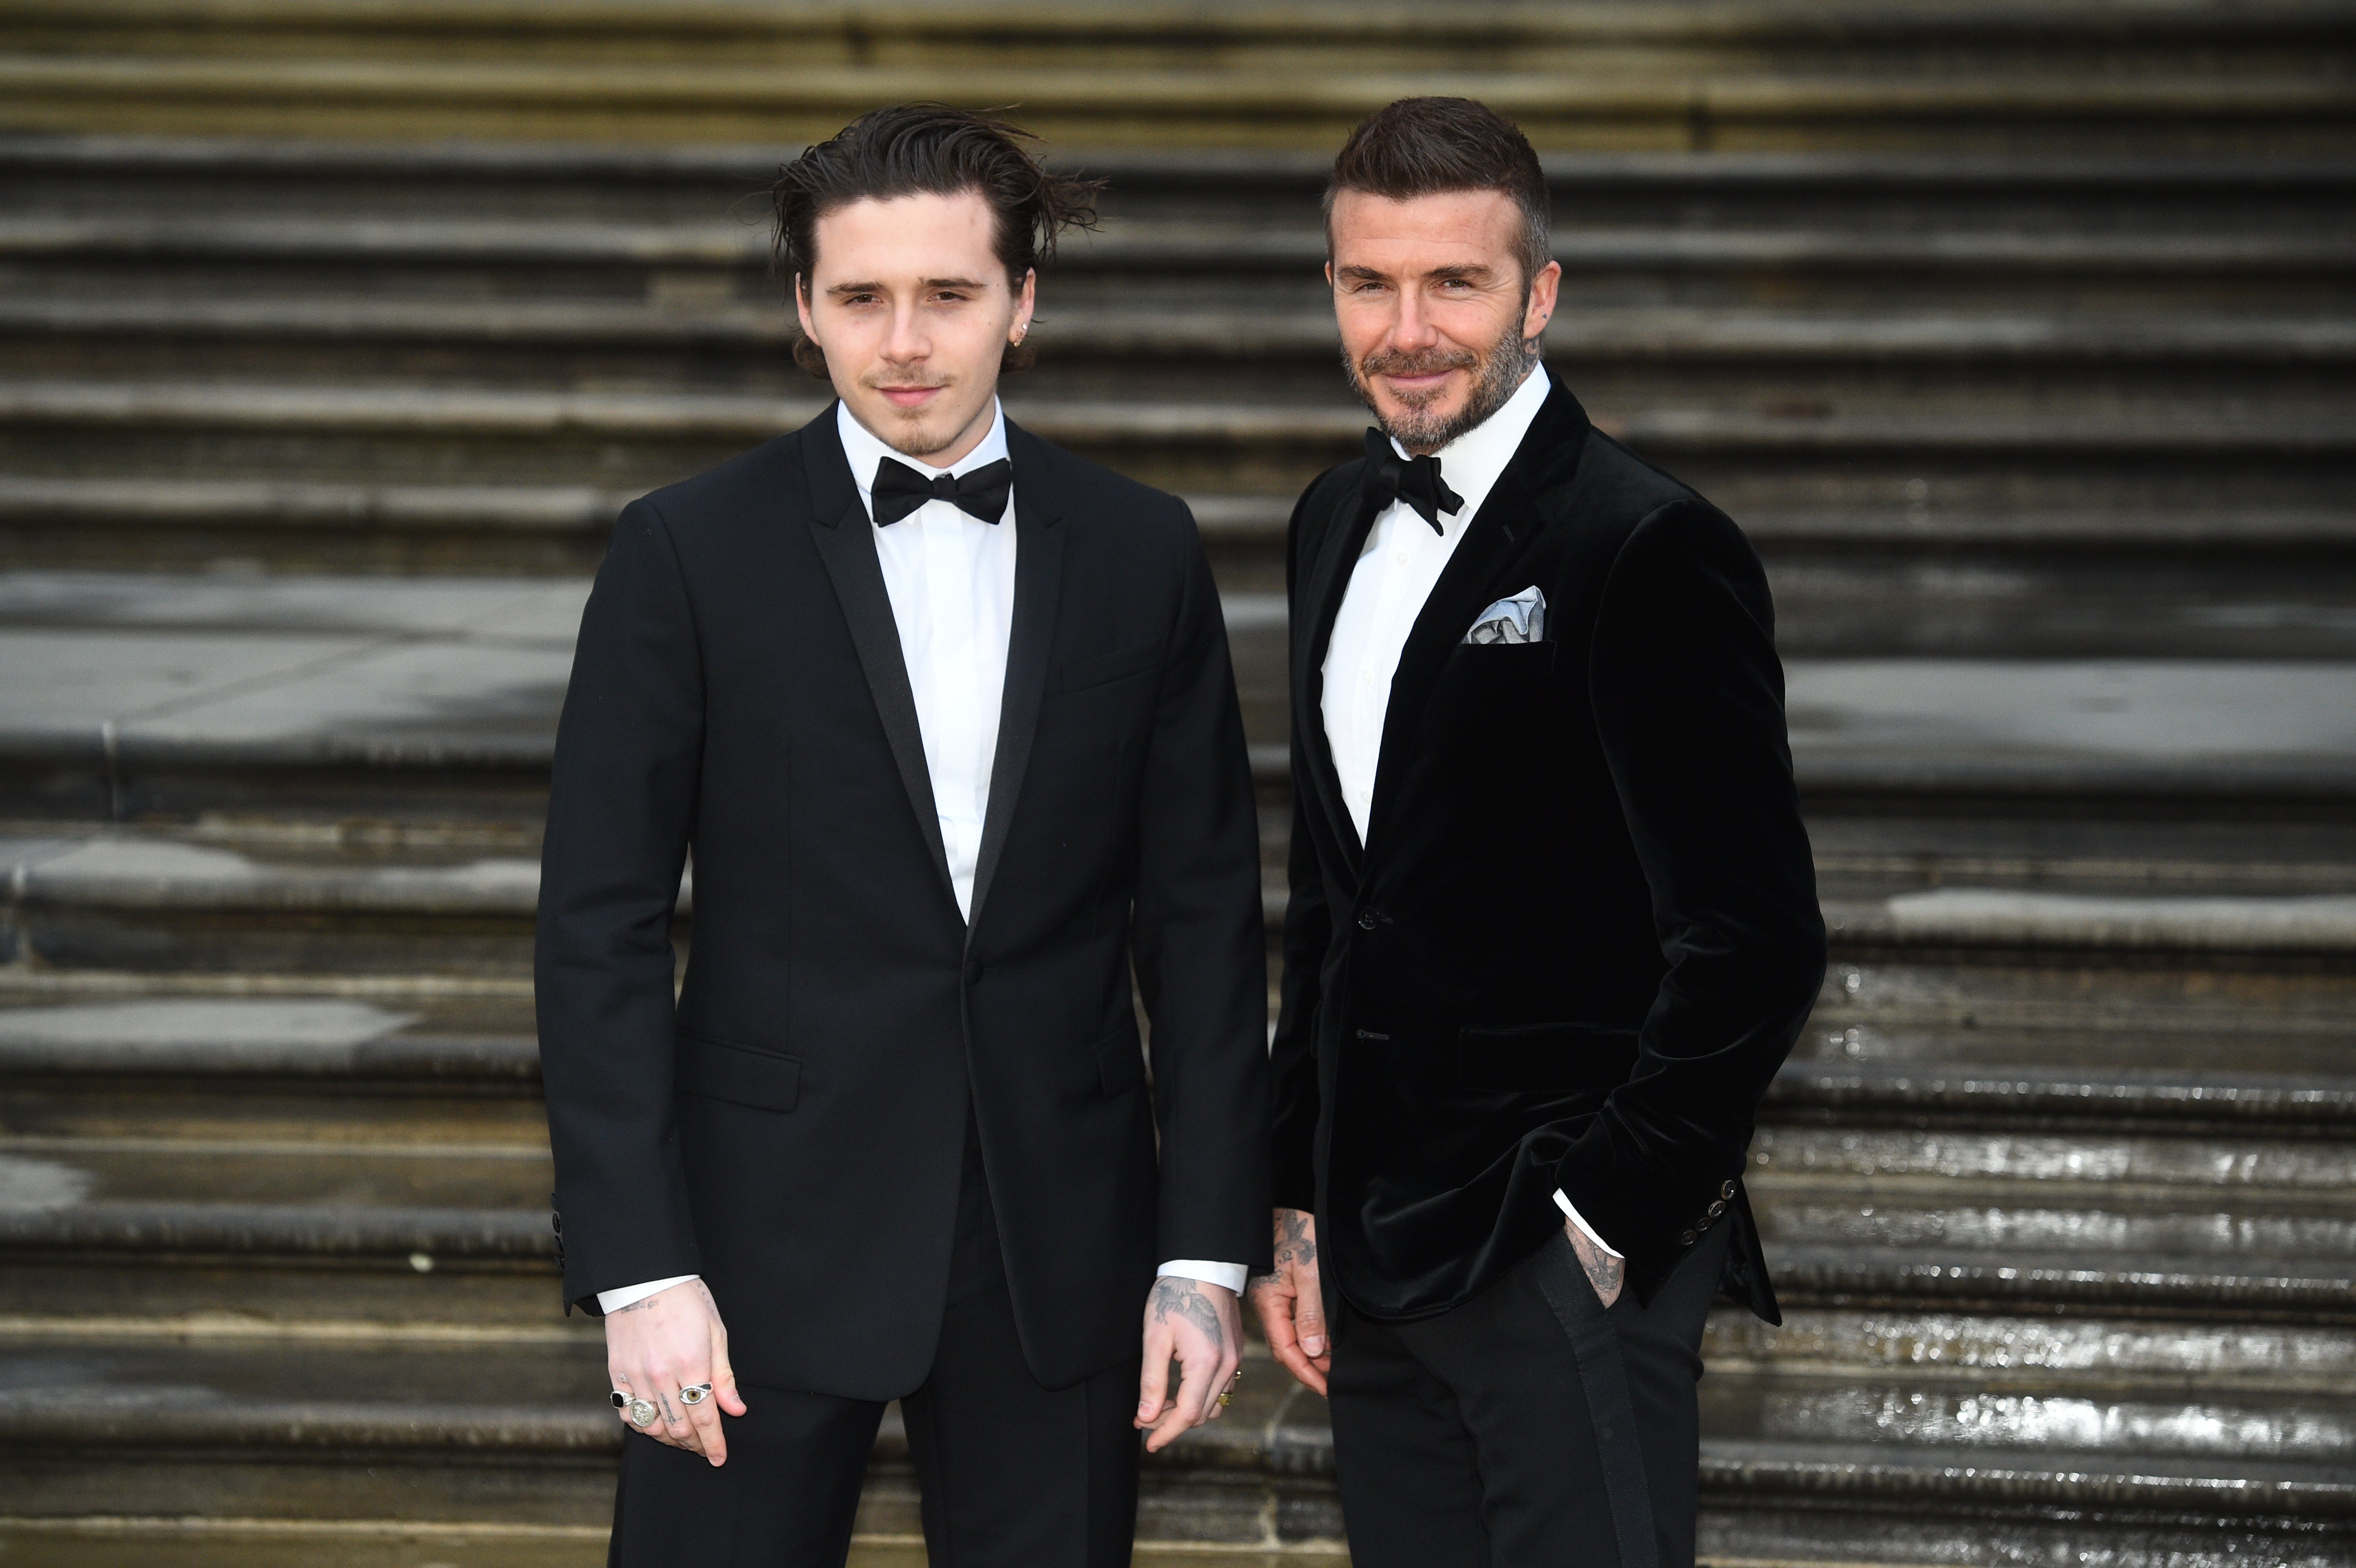 Brooklyn Beckham (left) married Nelson Peltz’s daughter Nicola earlier this year. (Kirsty O’Connor/PA)